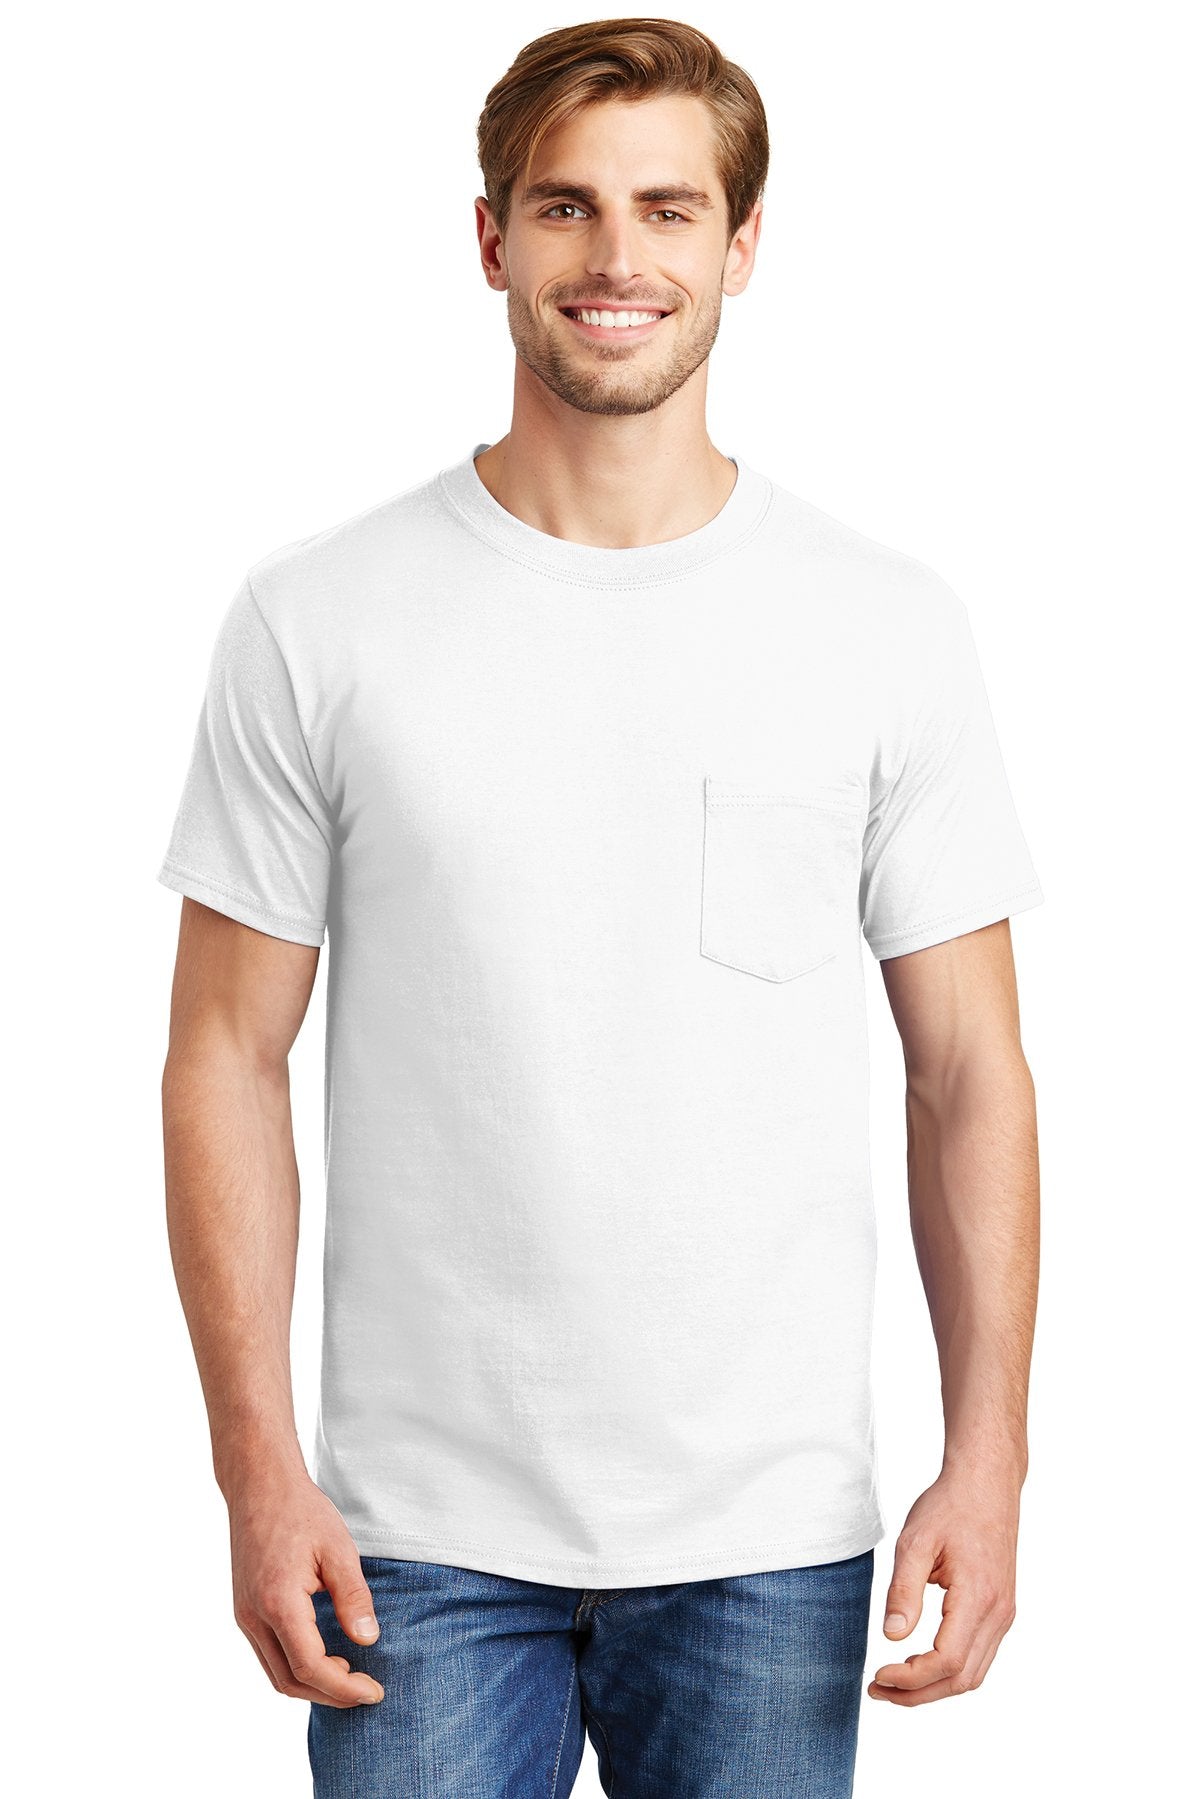 Hanes Beefy Cotton T Shirt with Pocket in White, add a custom design